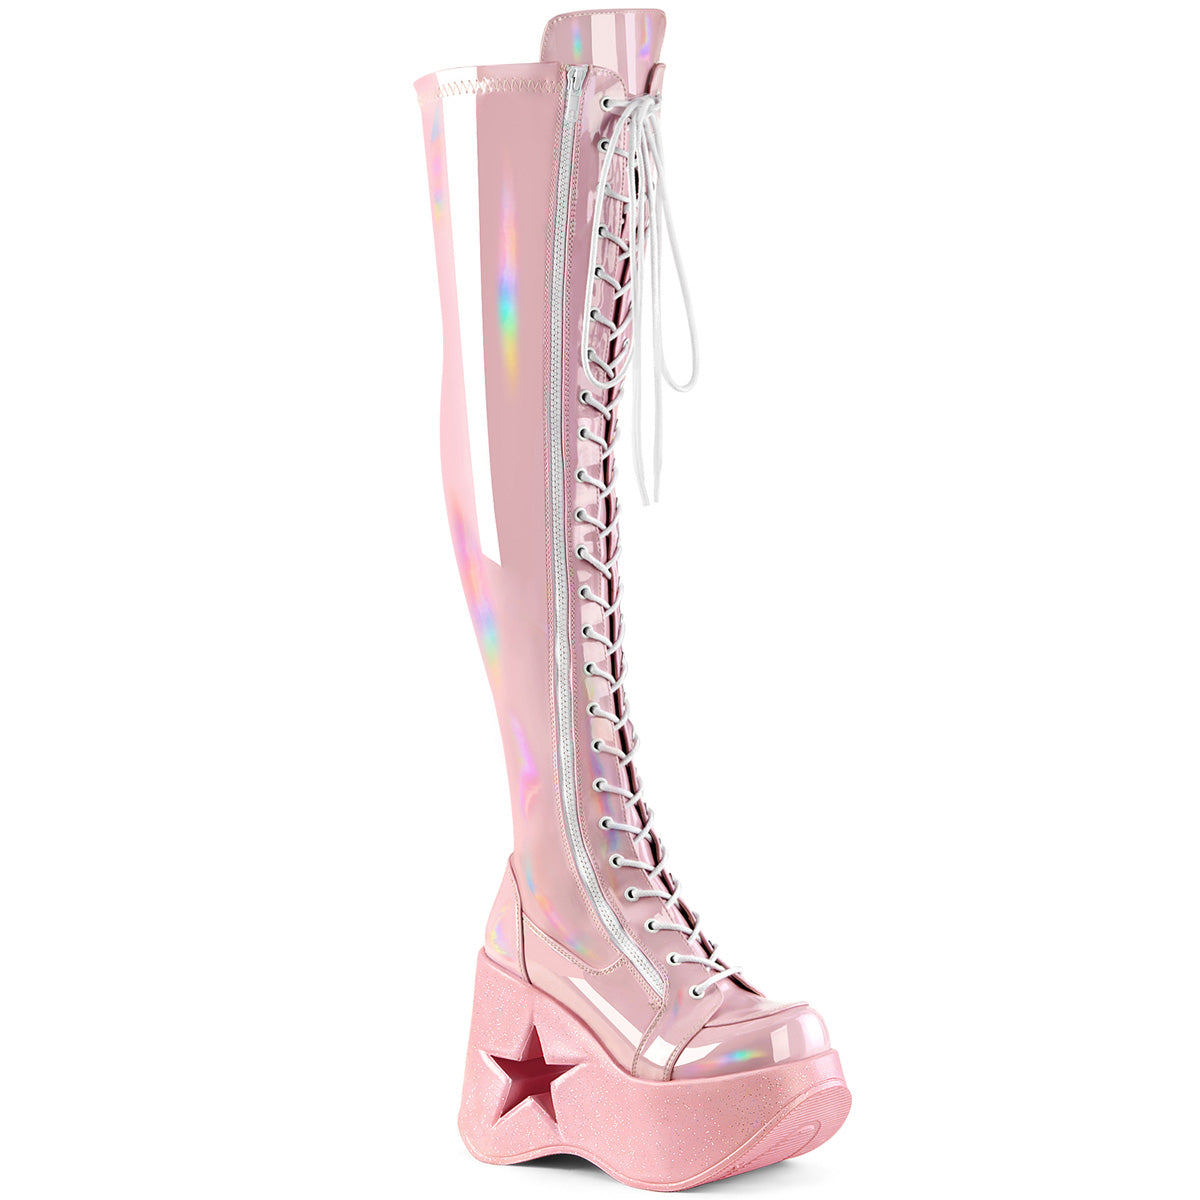 DYNAMITE-300 Baby Pink Holo Thigh Boots